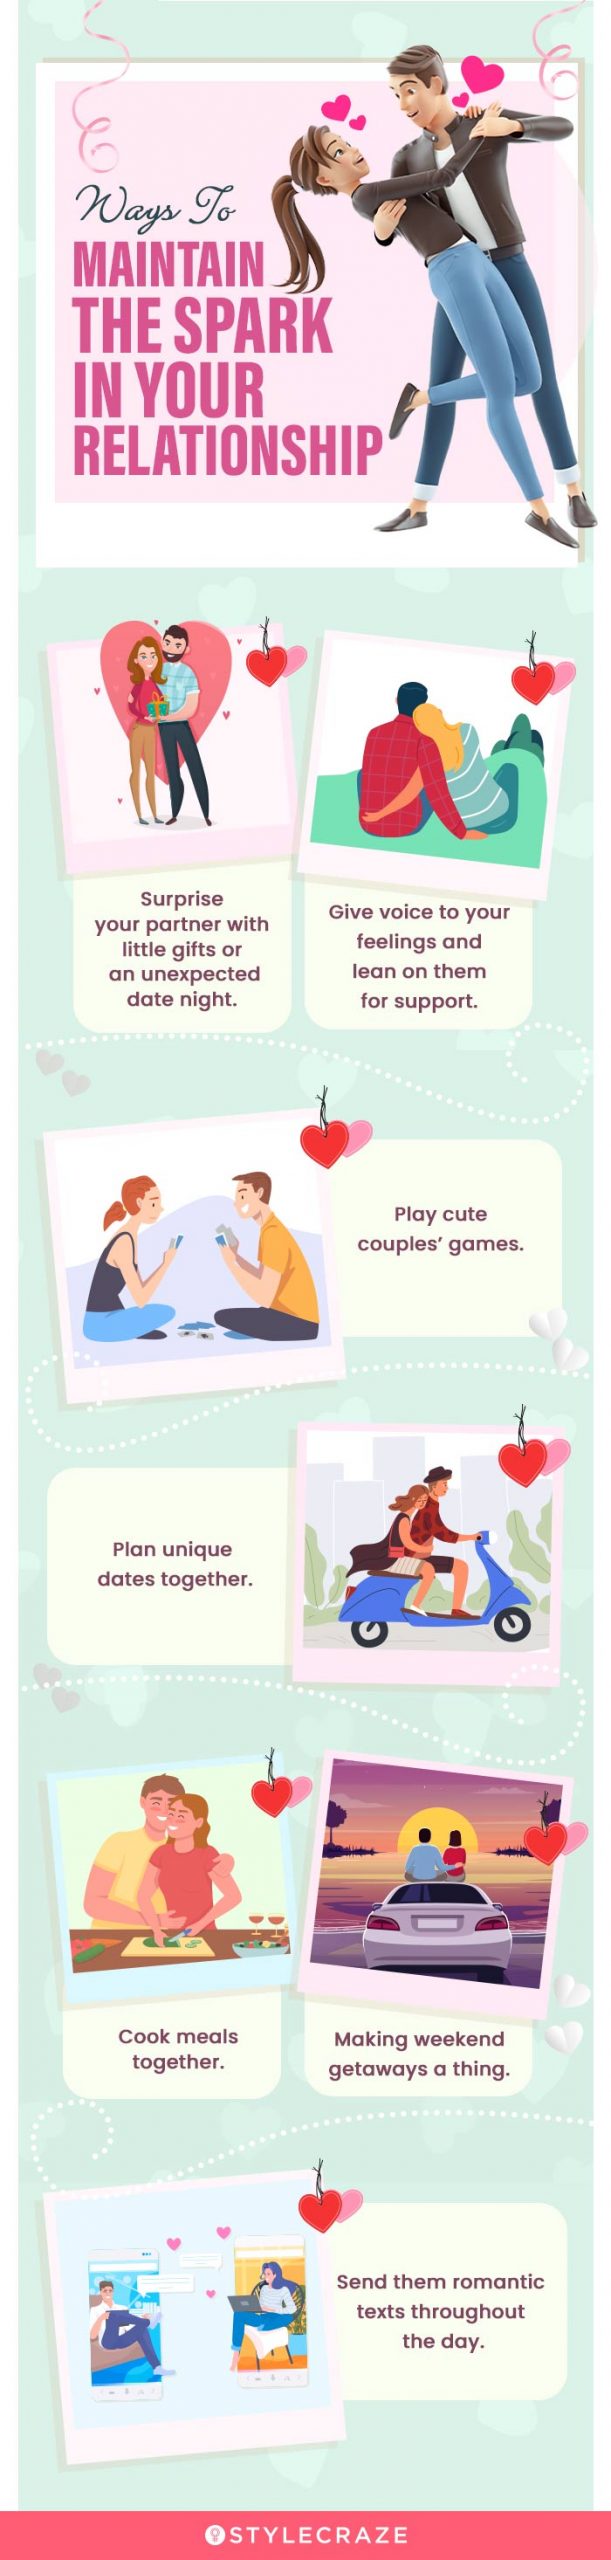 ways to maintain the spark in your relationship[infographic]